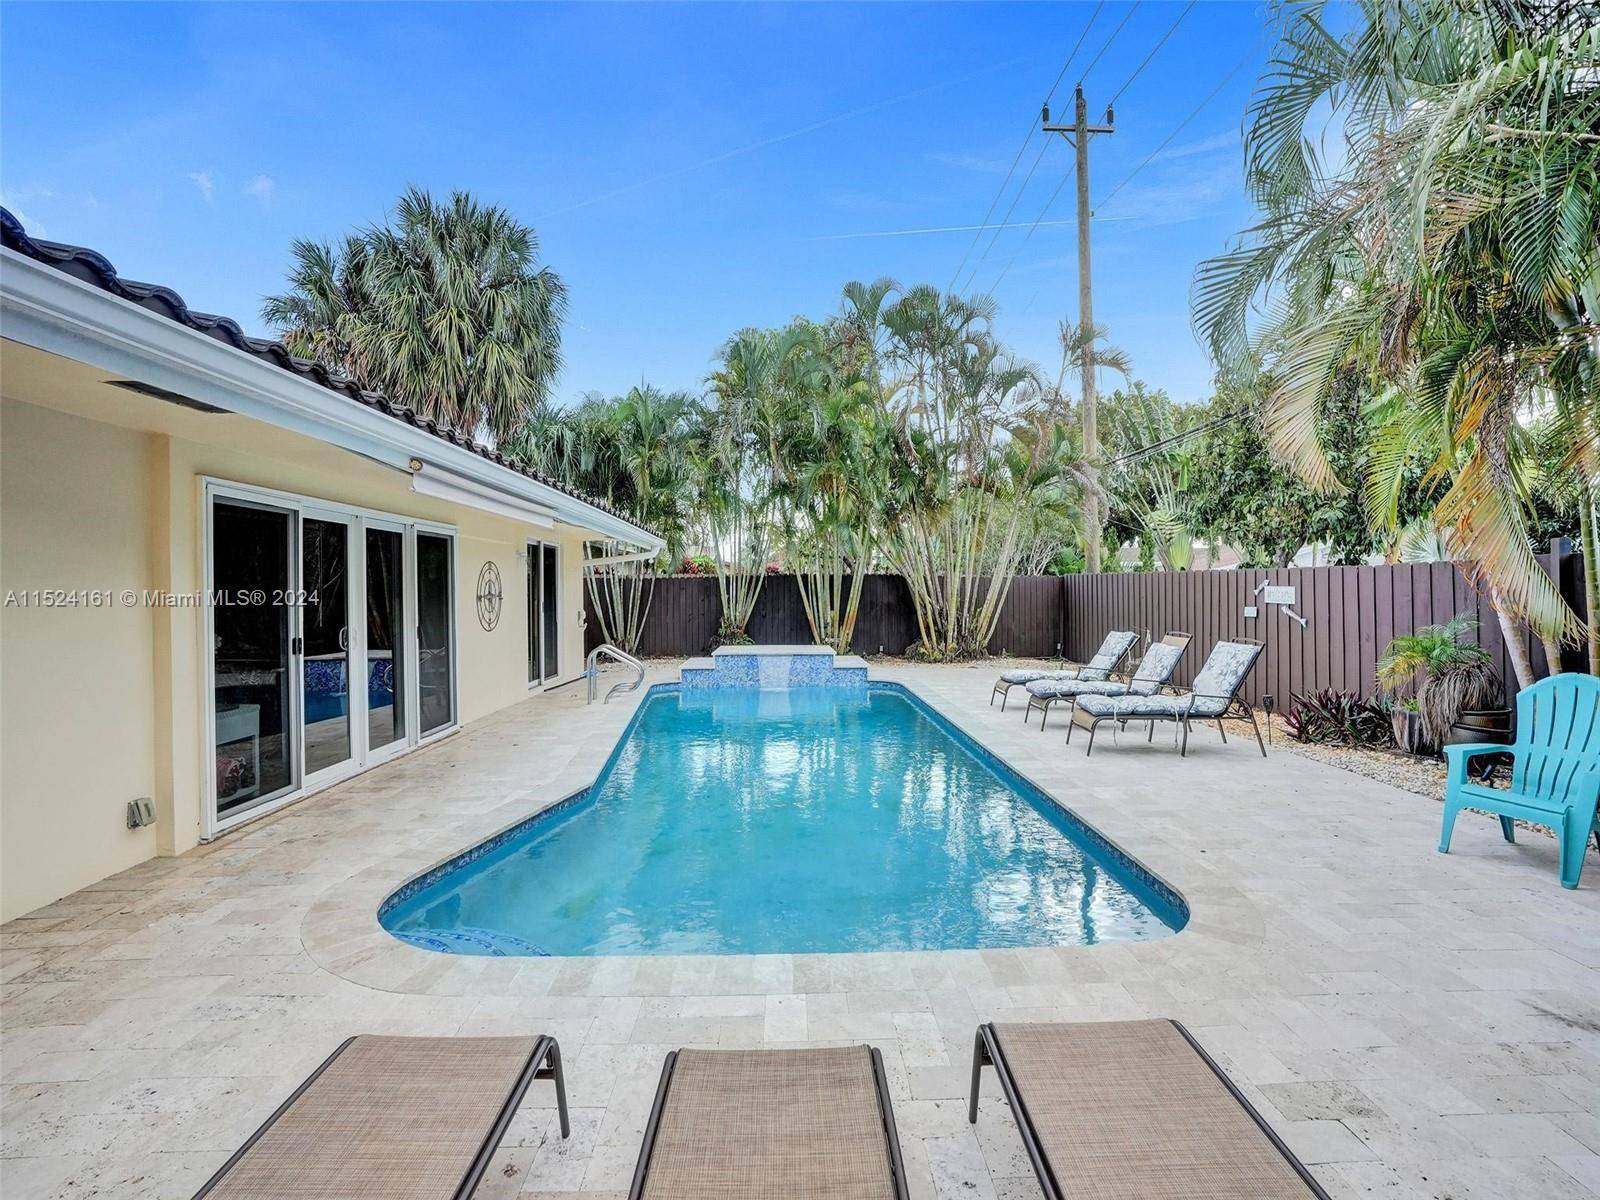 Once a sought after vacation rental, this property is now available for long term lease, offering an open floor plan that frames a lush, private backyard.